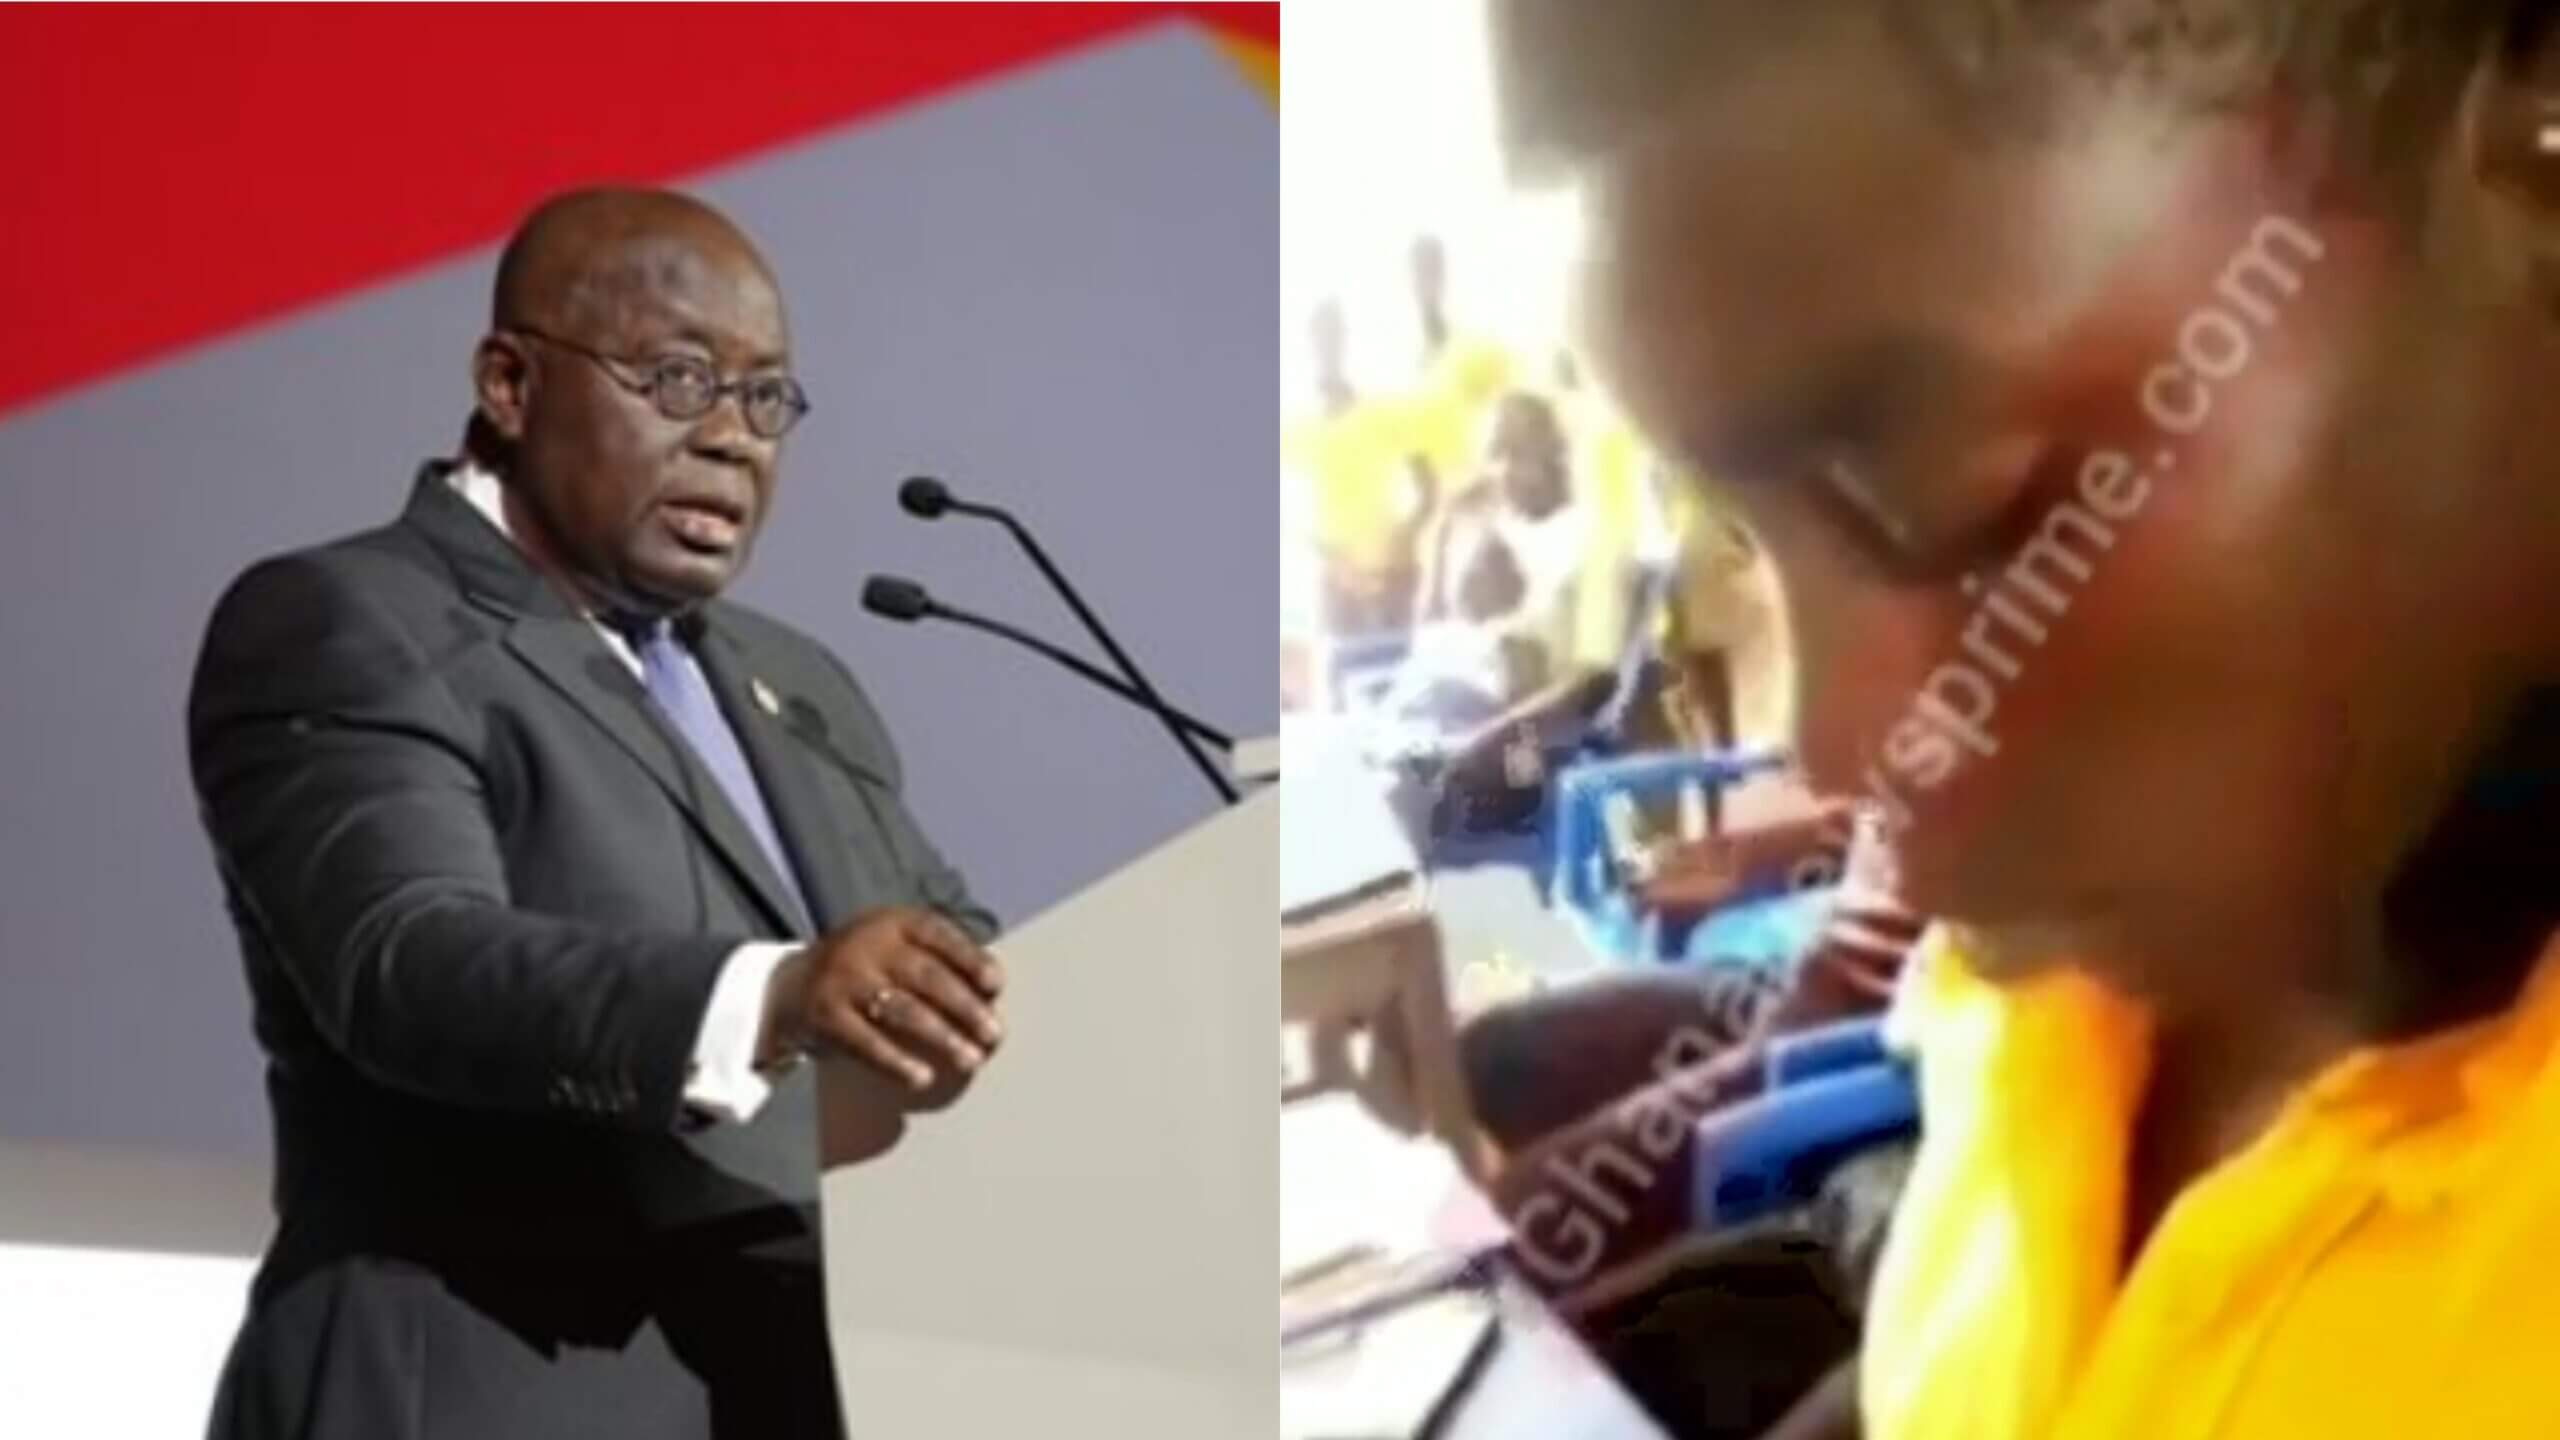 "Vote For Me, I Will Not Promise and Fail Like Nana Akufo Addo" - School Prefect Aspirant Boldly Says In Manifesto, Video Goes Viral